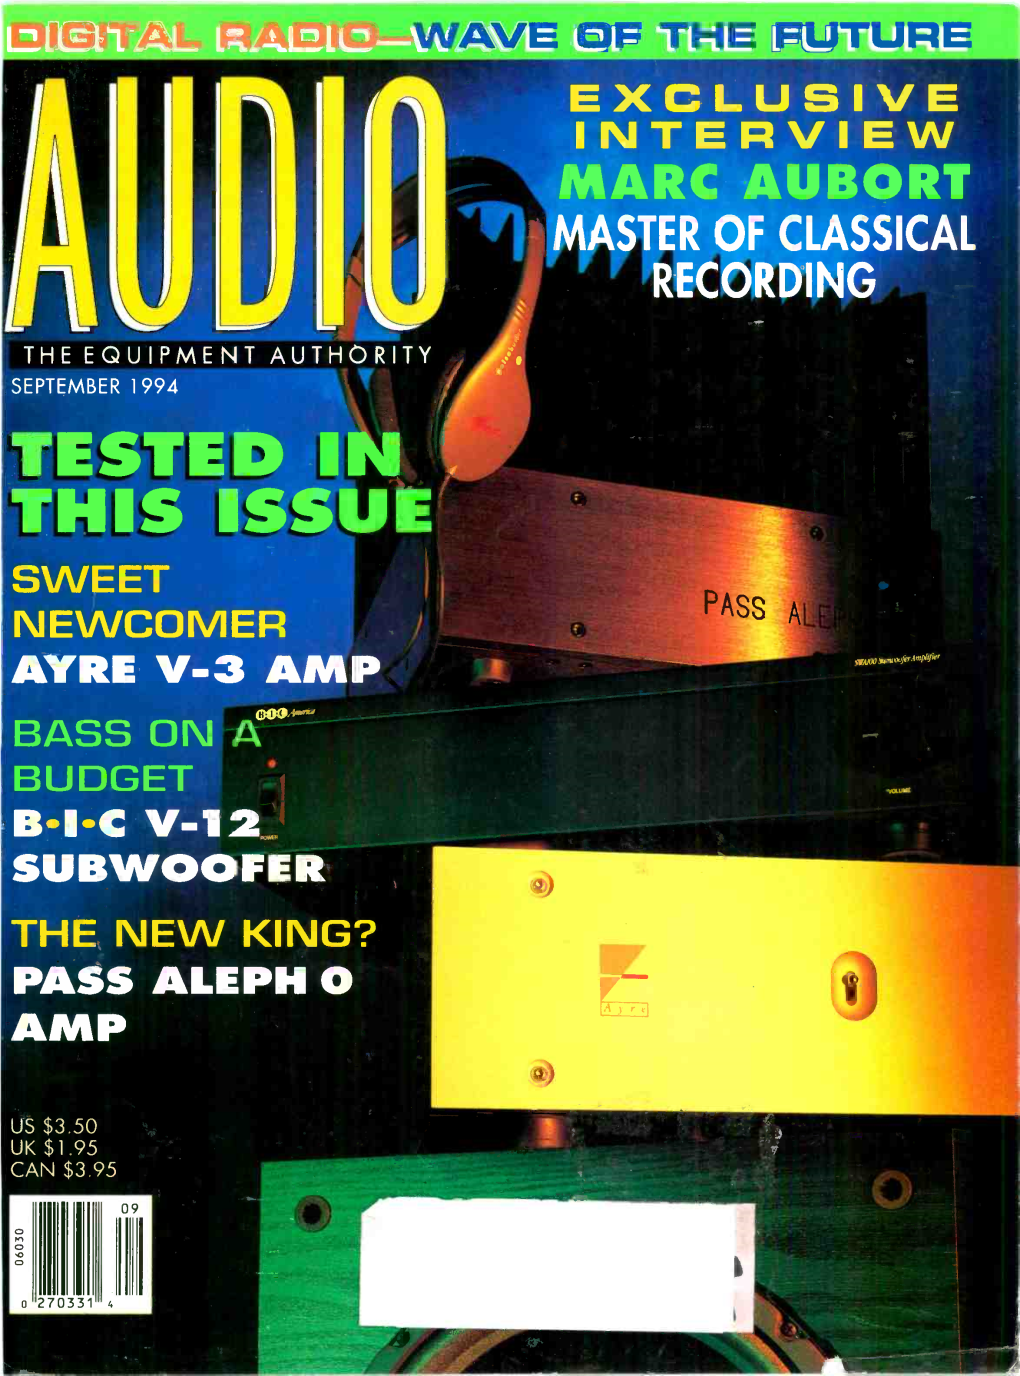 THIS ISSUE SWEET NEWCOMER AYRE V-3 AMP BASS Onactij BUDGET BIC V-12 SUBWOOFER the NEW KING? PASS ALE PH 0 AMP